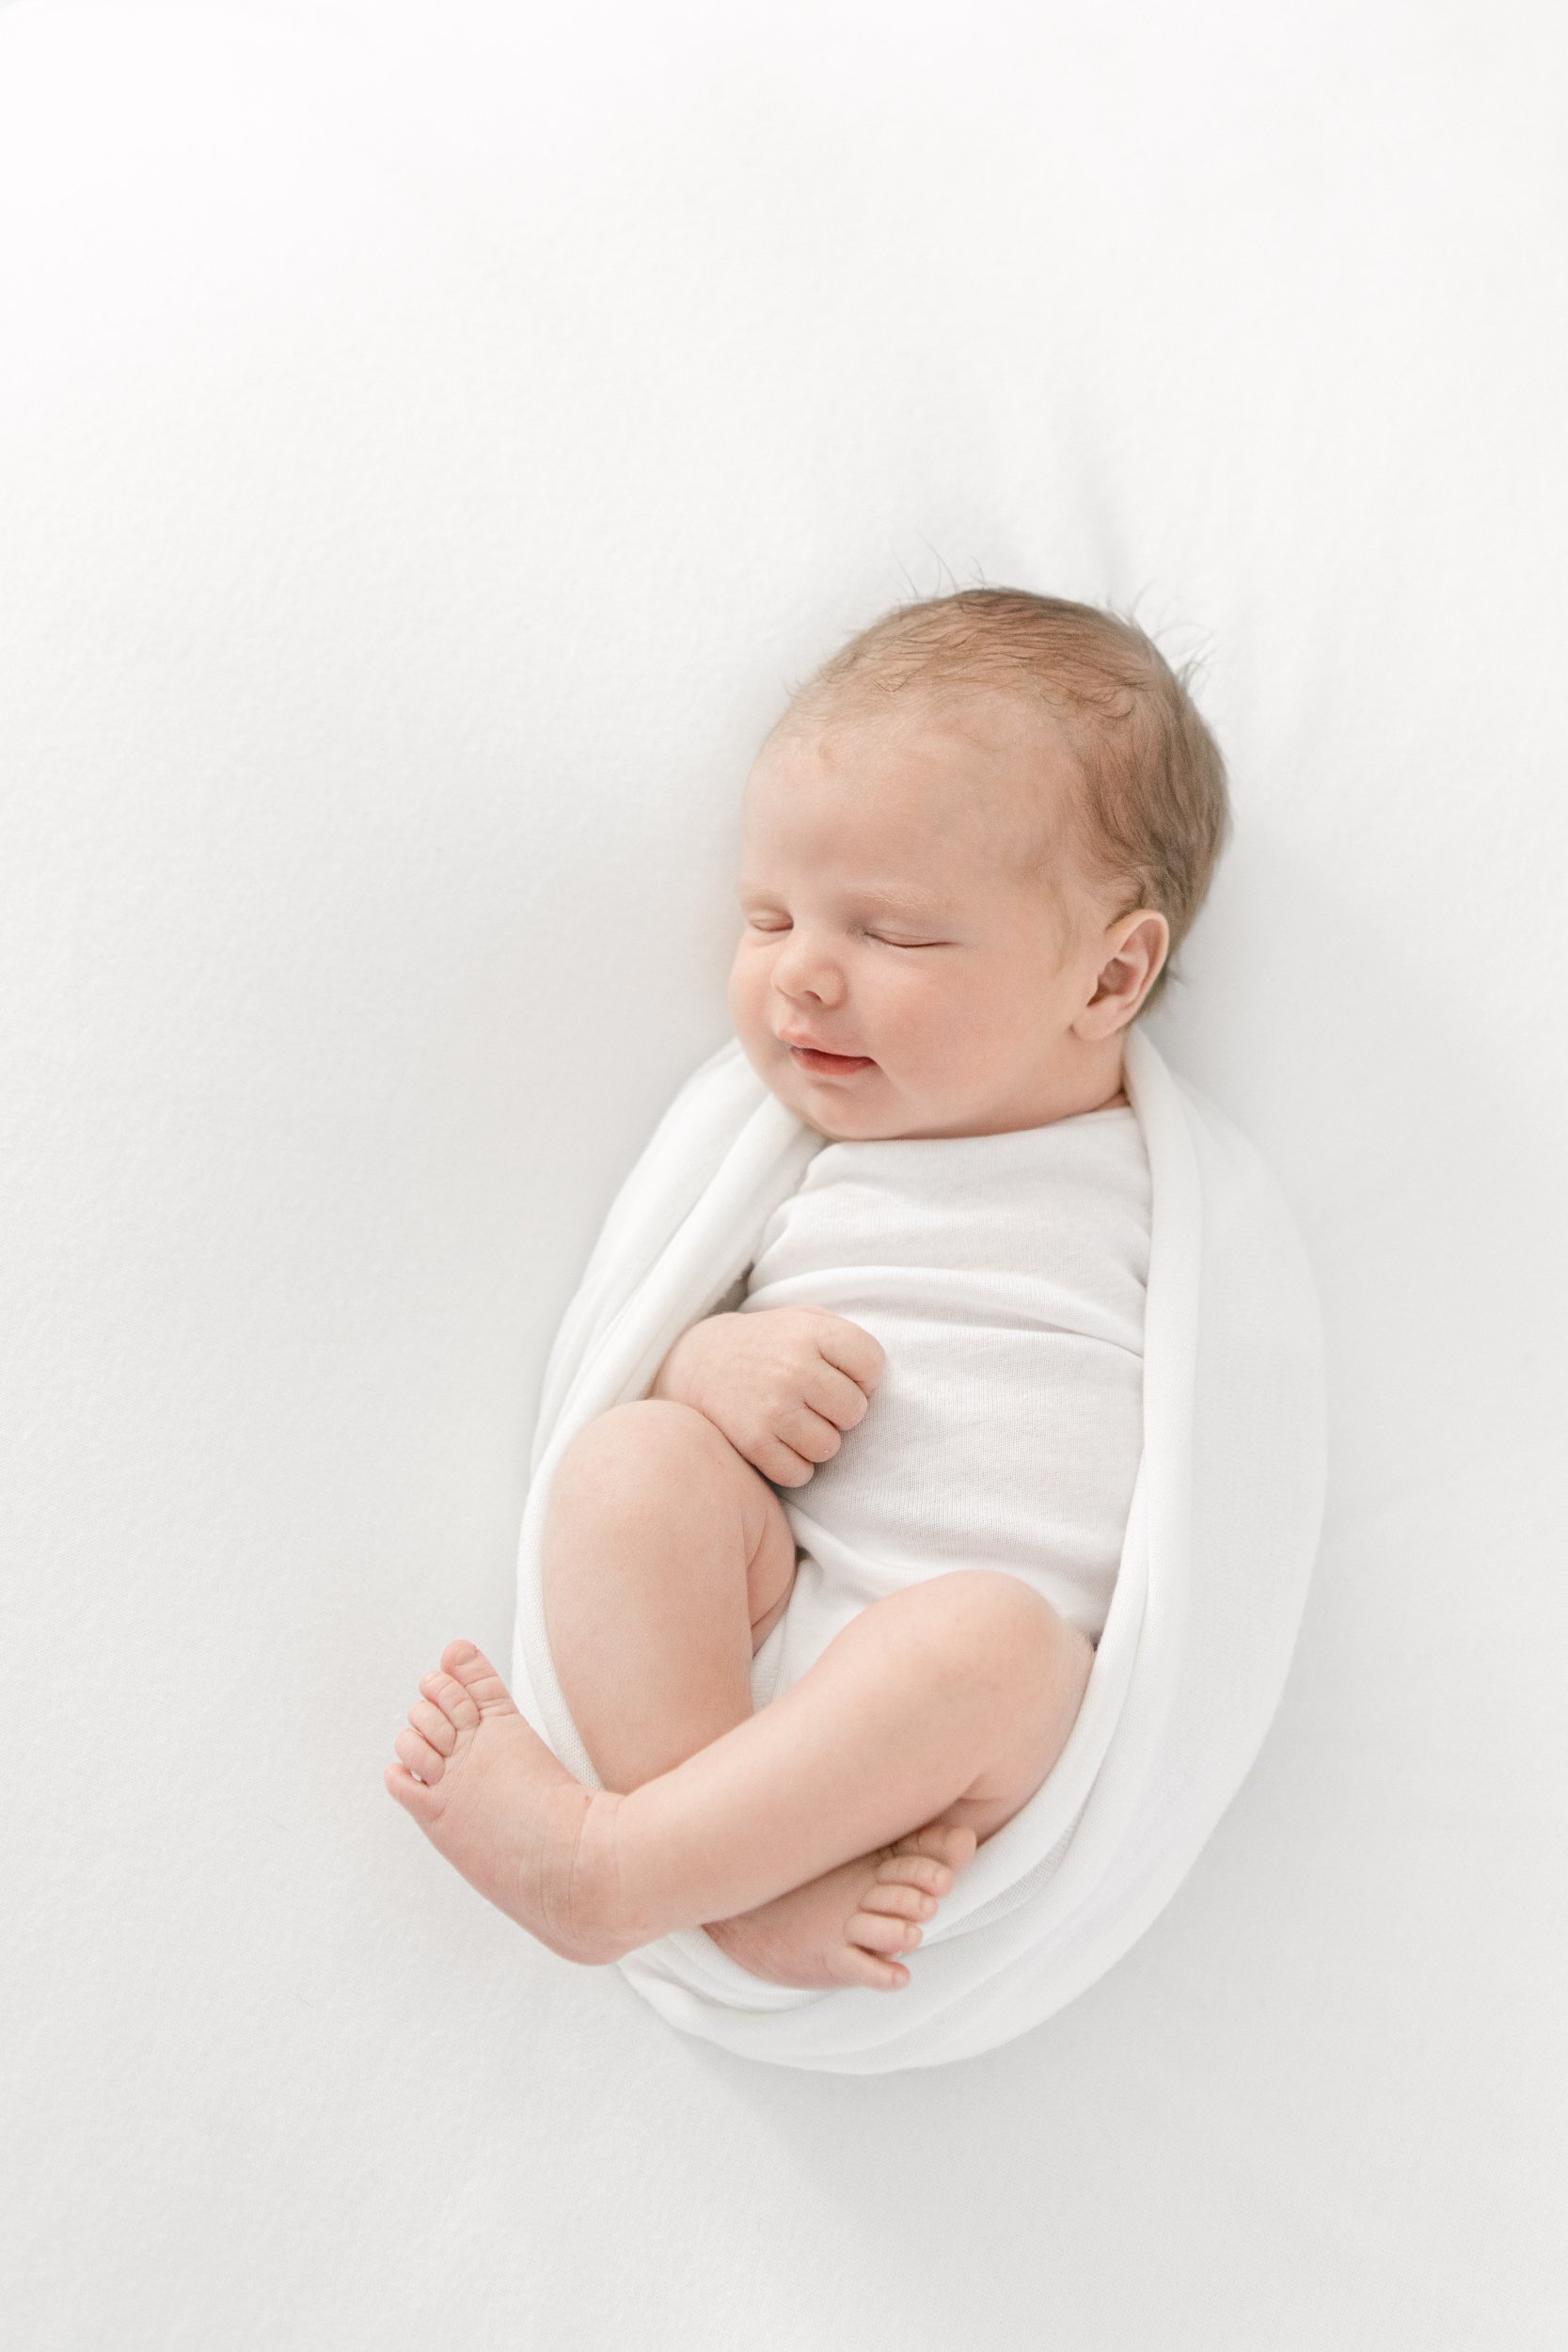  Tender newborn baby wrapped in a white swaddle with her legs sticking out and sleeping captured in a New Jersey studio by Nicole Hawkins Photography. baby wrapped in a swaddle all-white studio newborn session baby swaddle pose ideas baby feet baby l